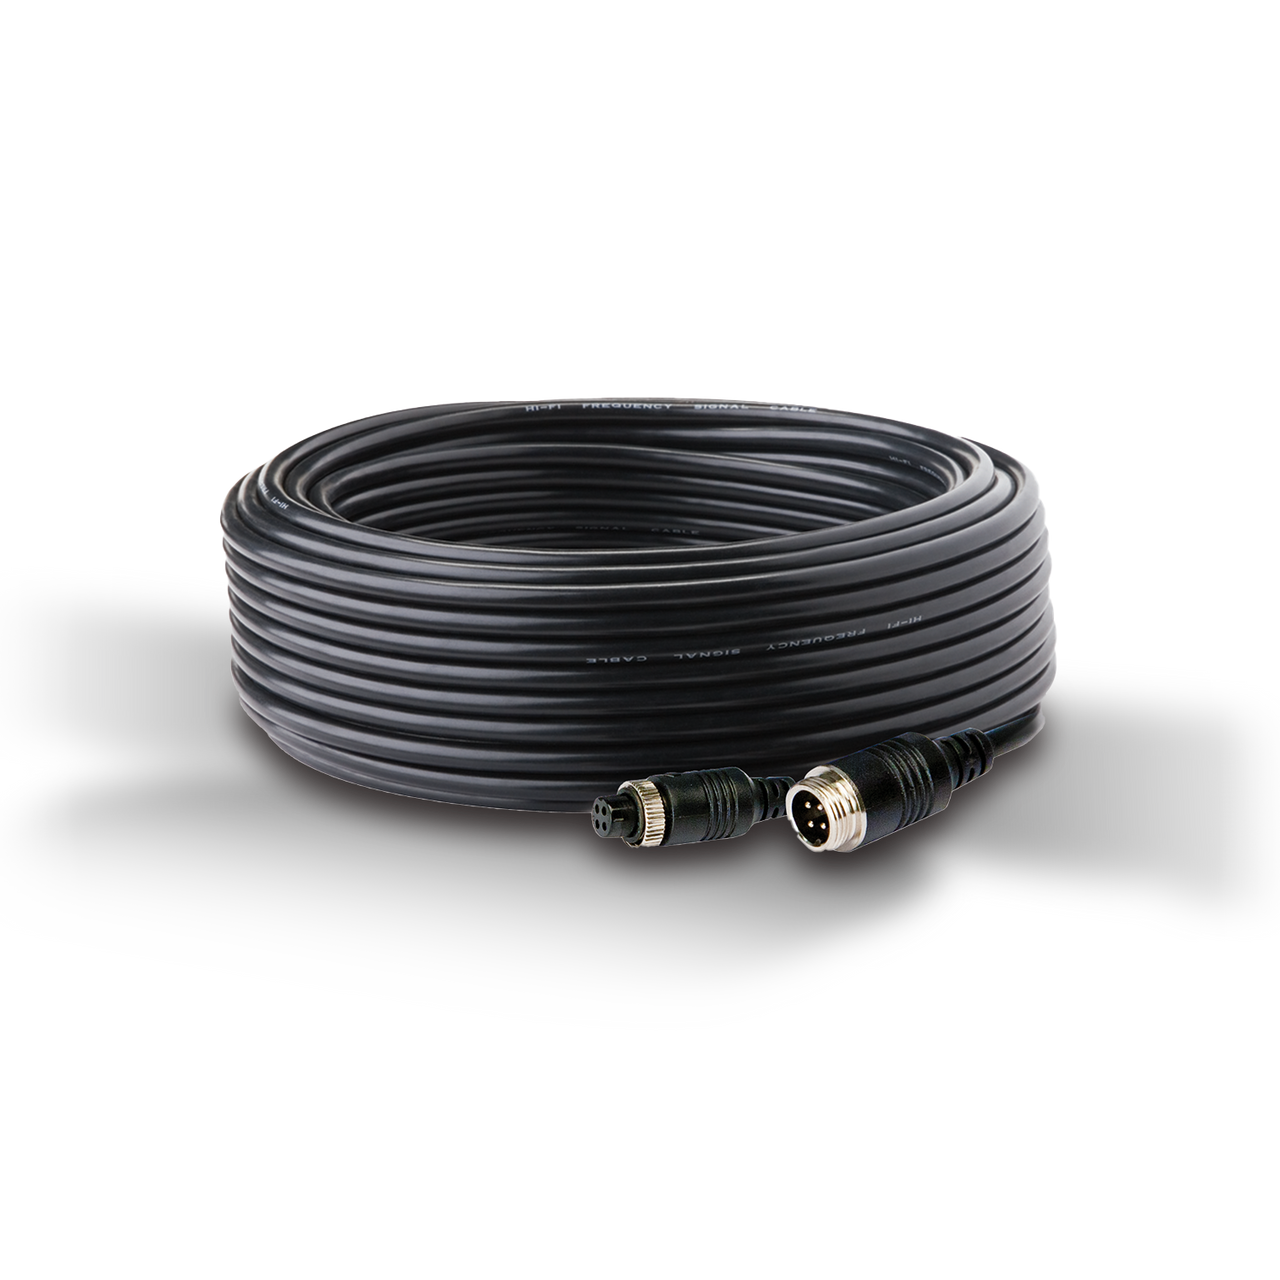 Code-3 - CCTC20-4 - Camera Transmission Cable, 20M/65 (4 Pin) - For use with any current Code 3 camera